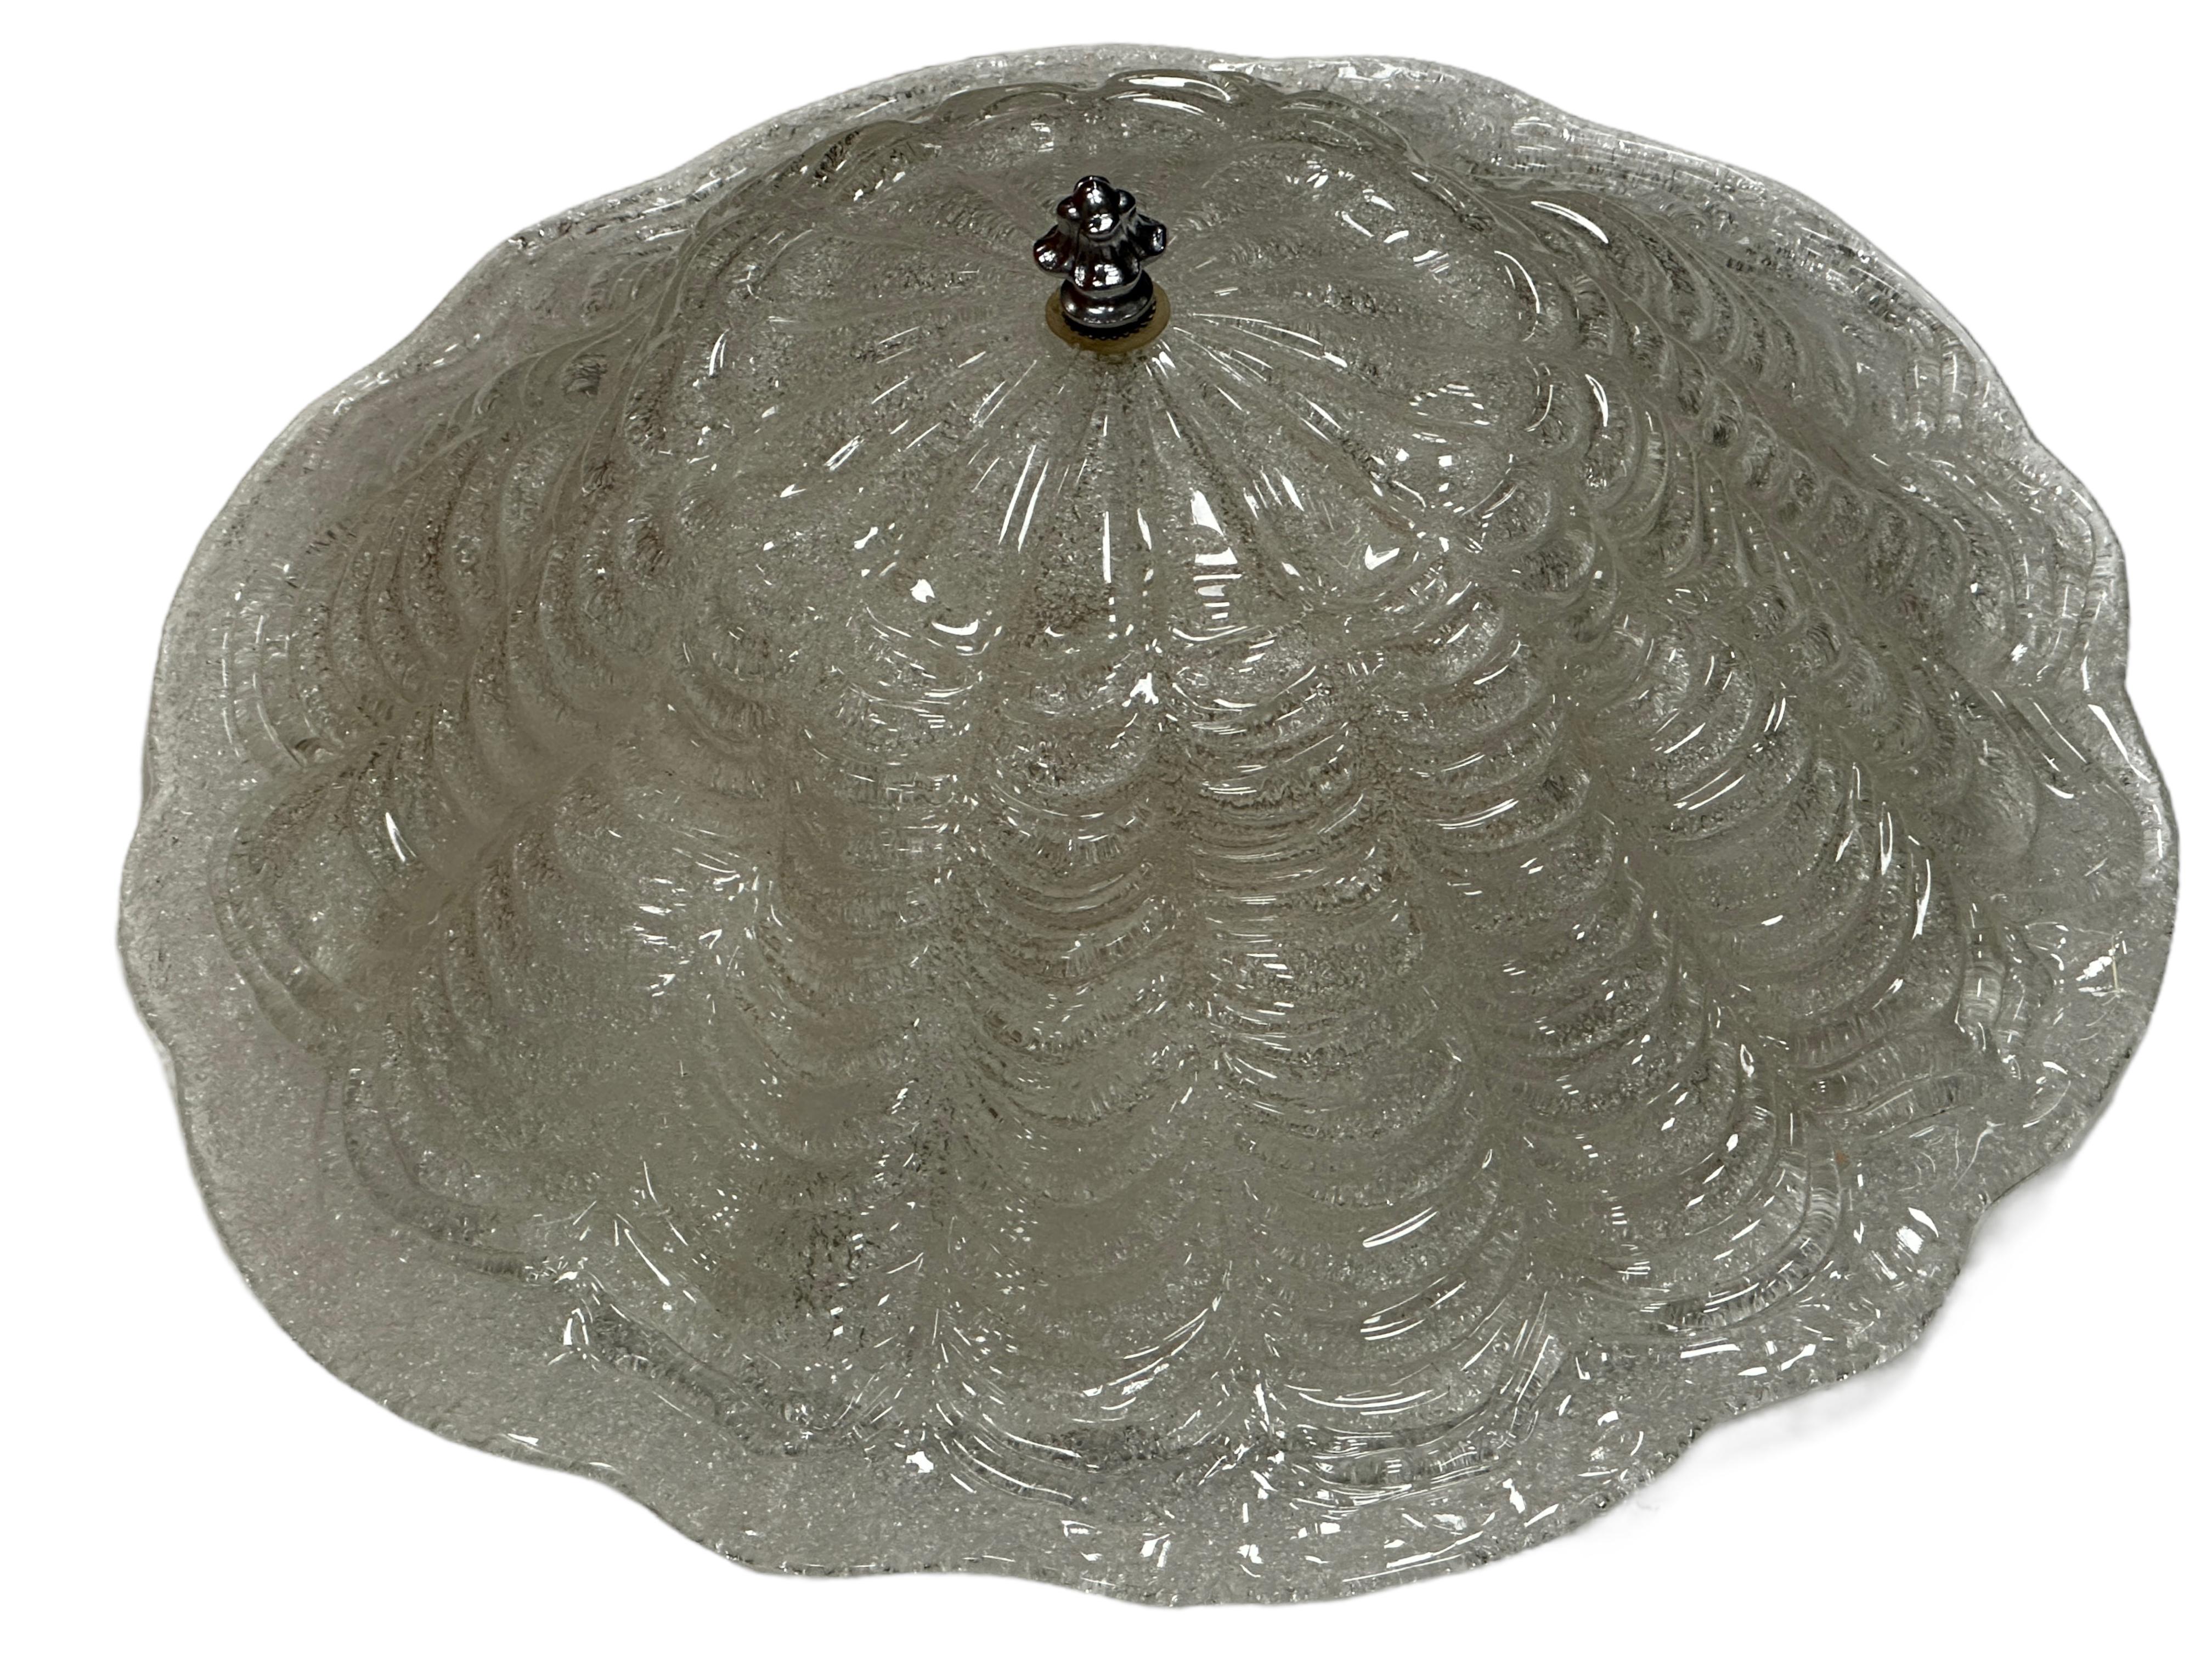 Monumental Large Murano Glass Dome Flush Mount Venini Style 1970s, Italy For Sale 1